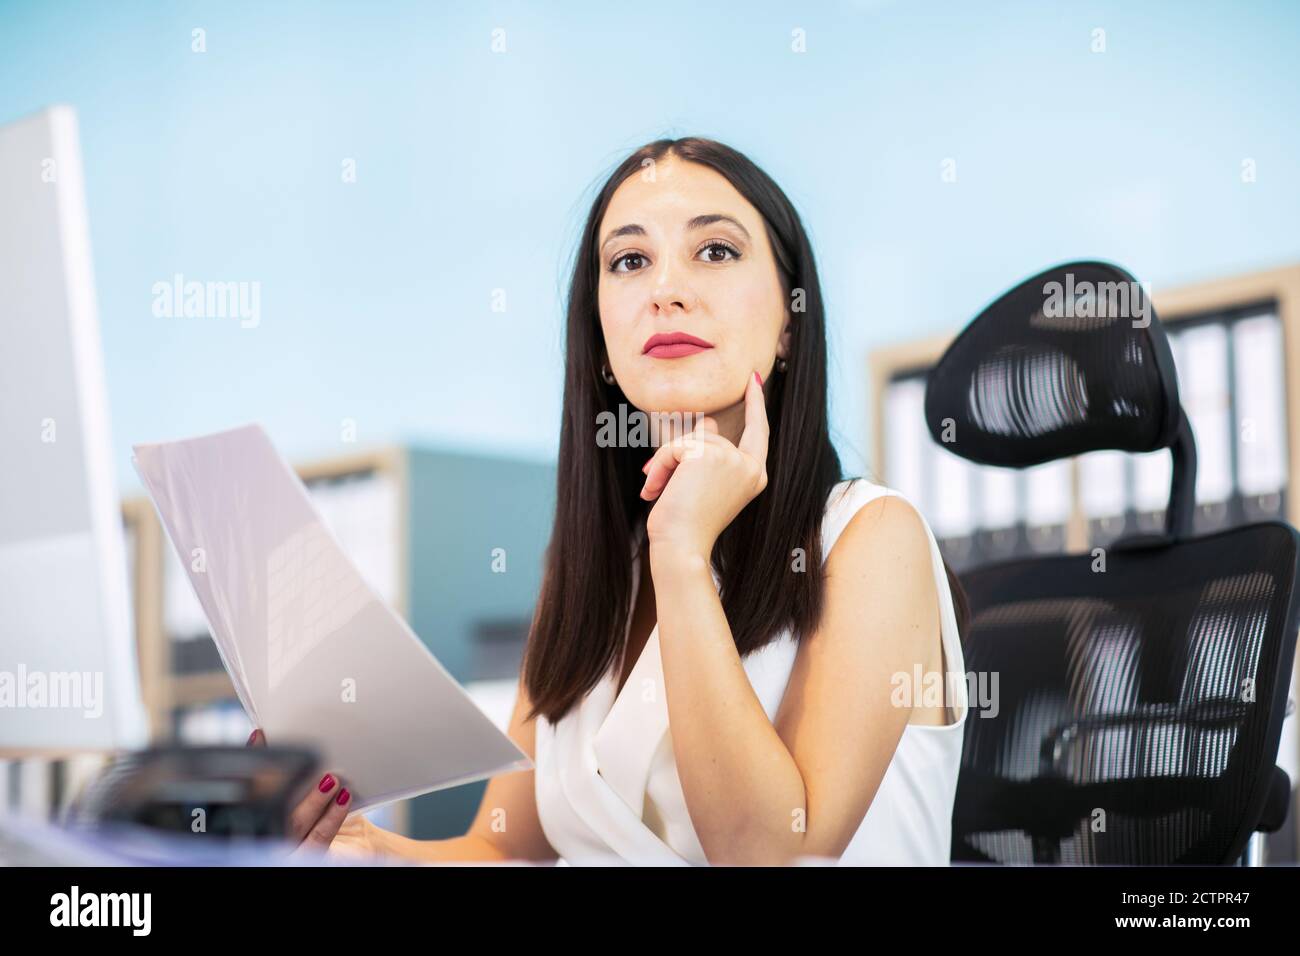 Business woman sitting at desk, holding document Stock Photo